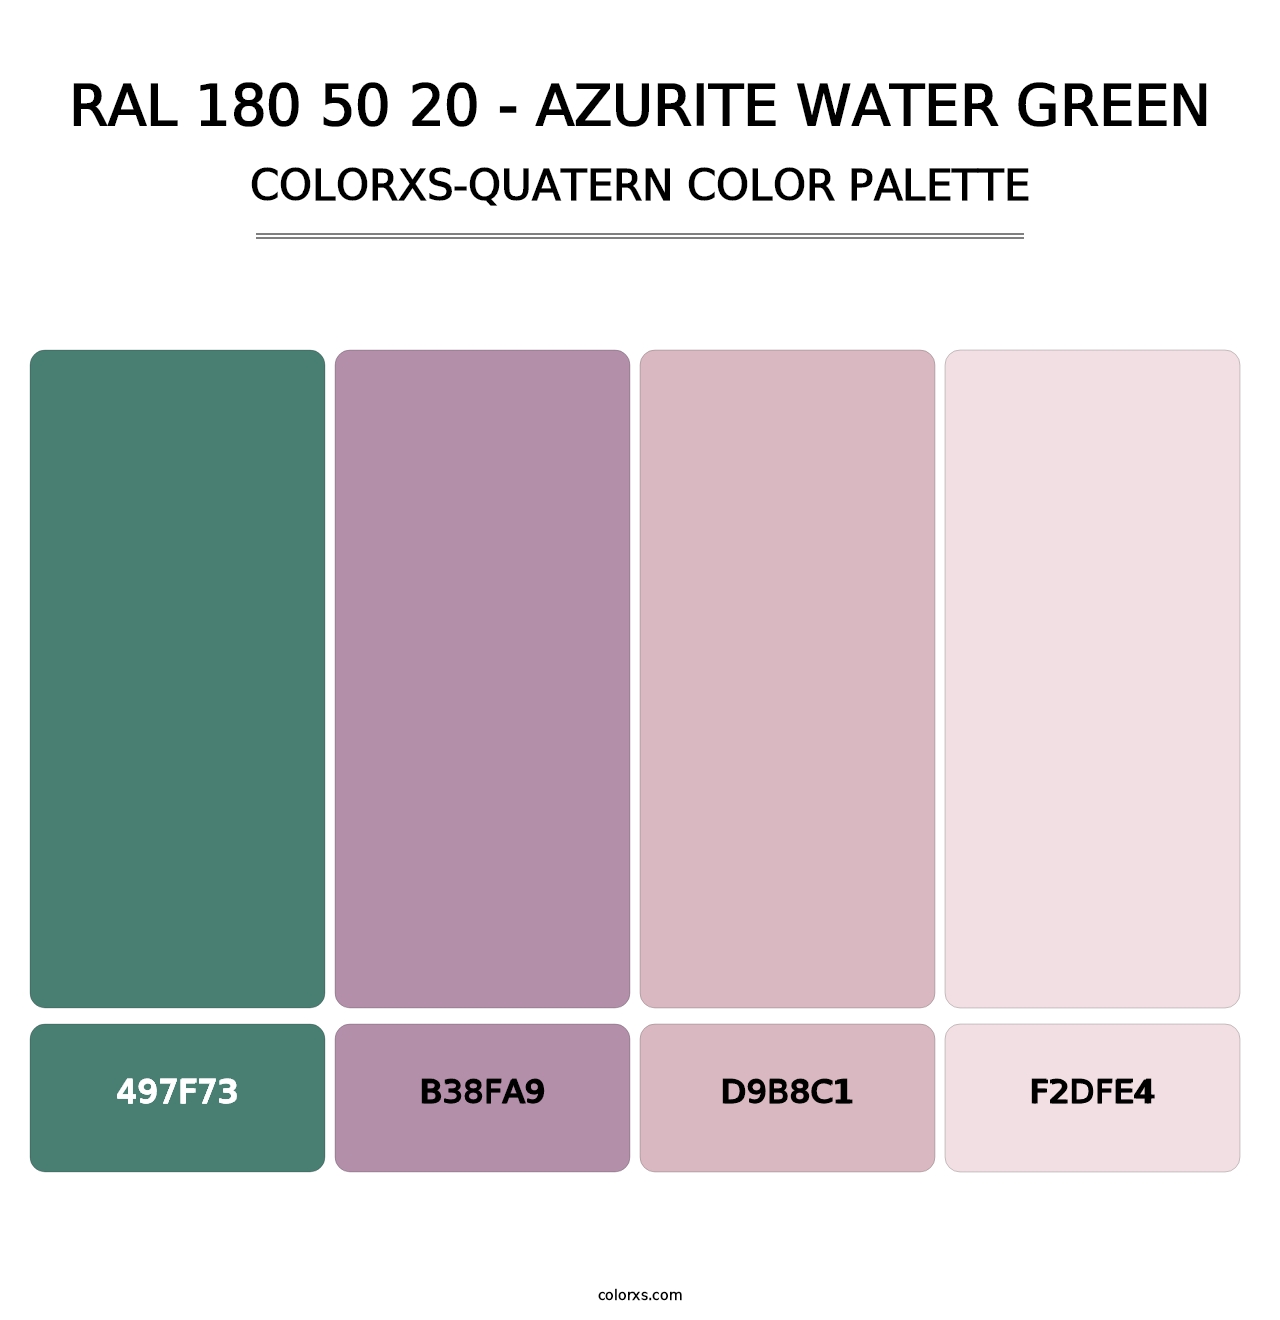 RAL 180 50 20 - Azurite Water Green - Colorxs Quatern Palette